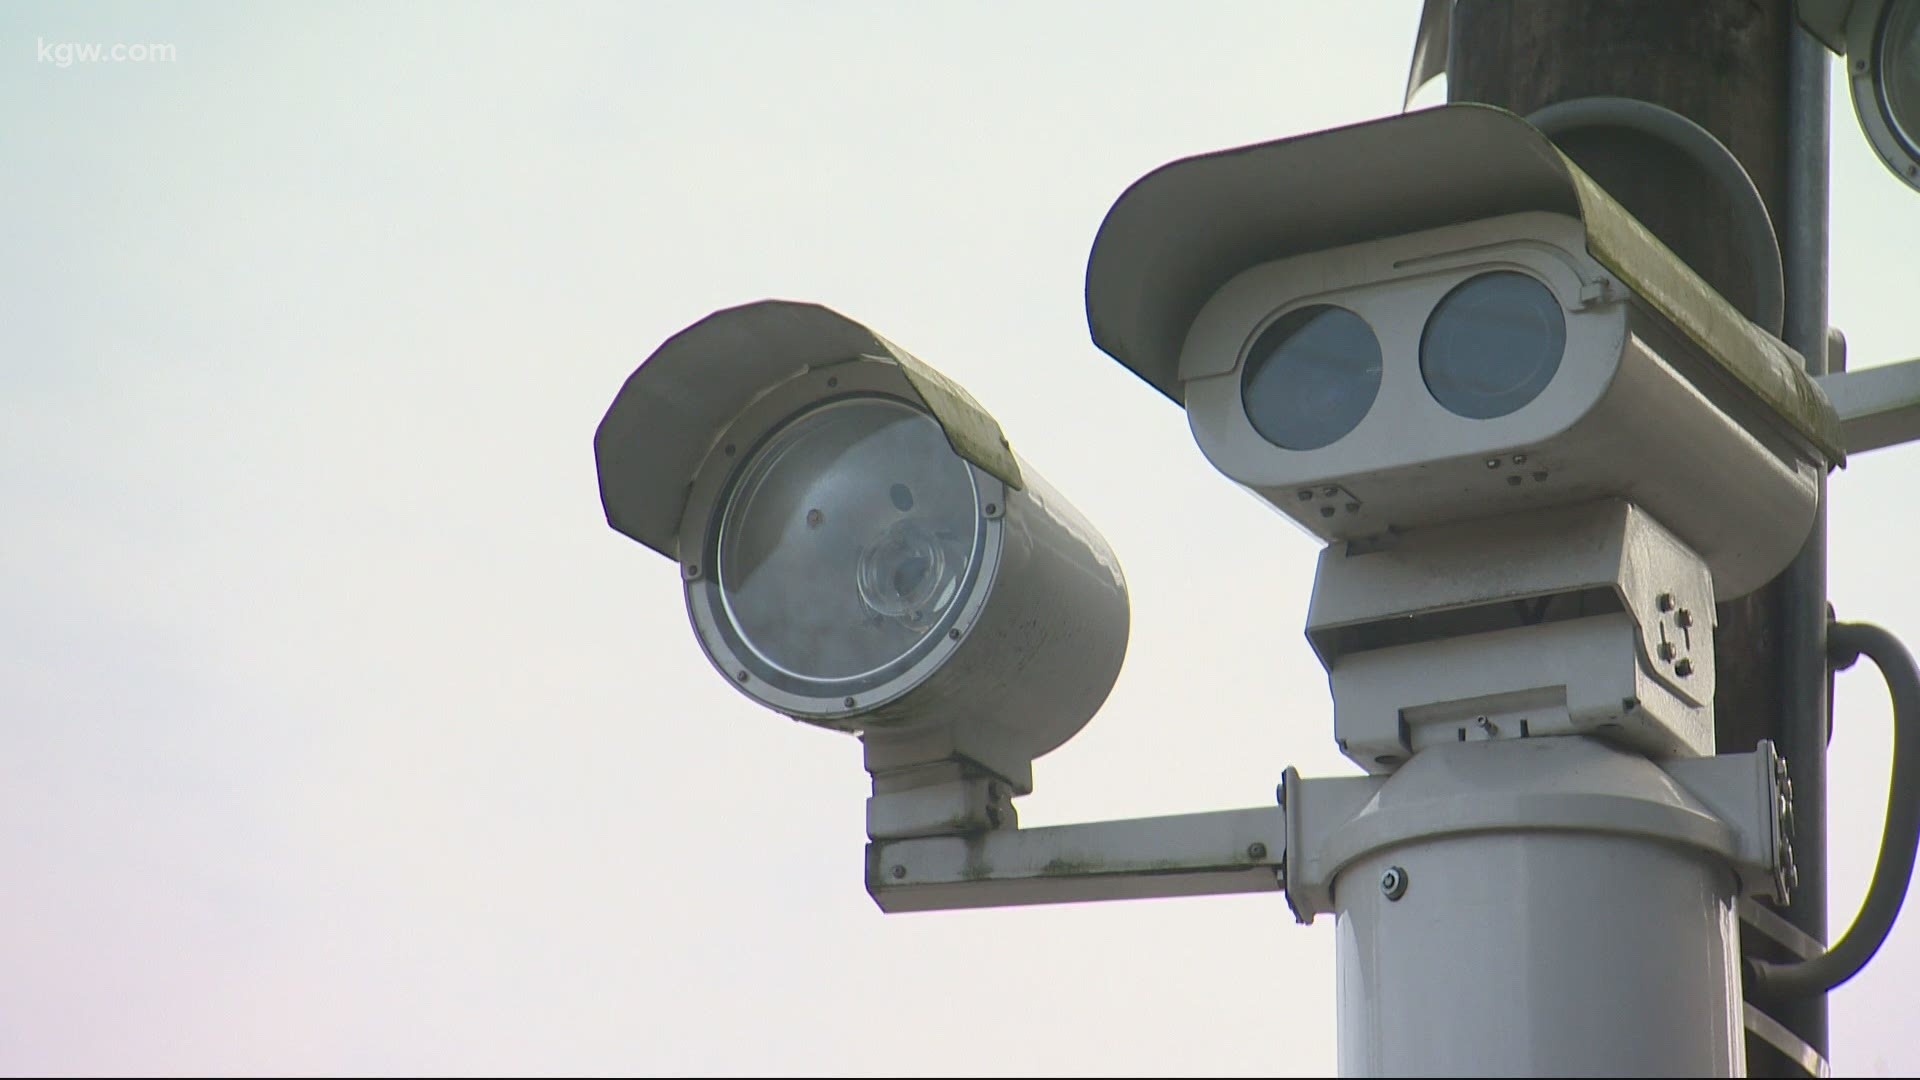 Portland may be getting more fixed photo radar. As Chris McGinness reports, the city is behind a proposal to expand the use on high crash corridors.